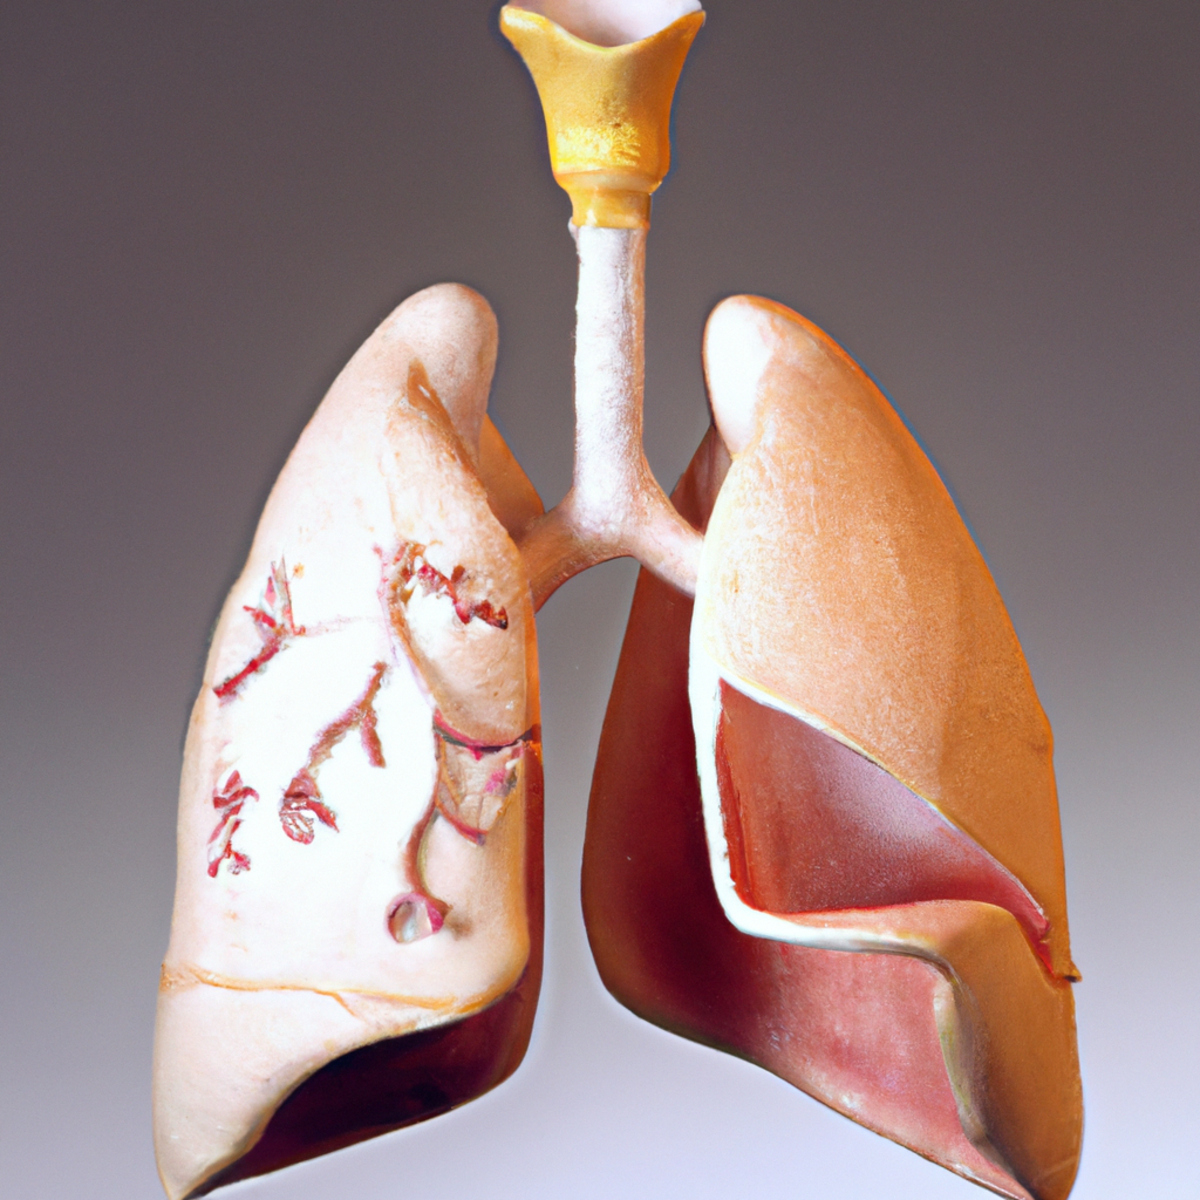 Close-up of human lung model showcasing bronchial tubes and alveoli, highlighting Hermansky-Pudlak Syndrome's impact on lung functionality.